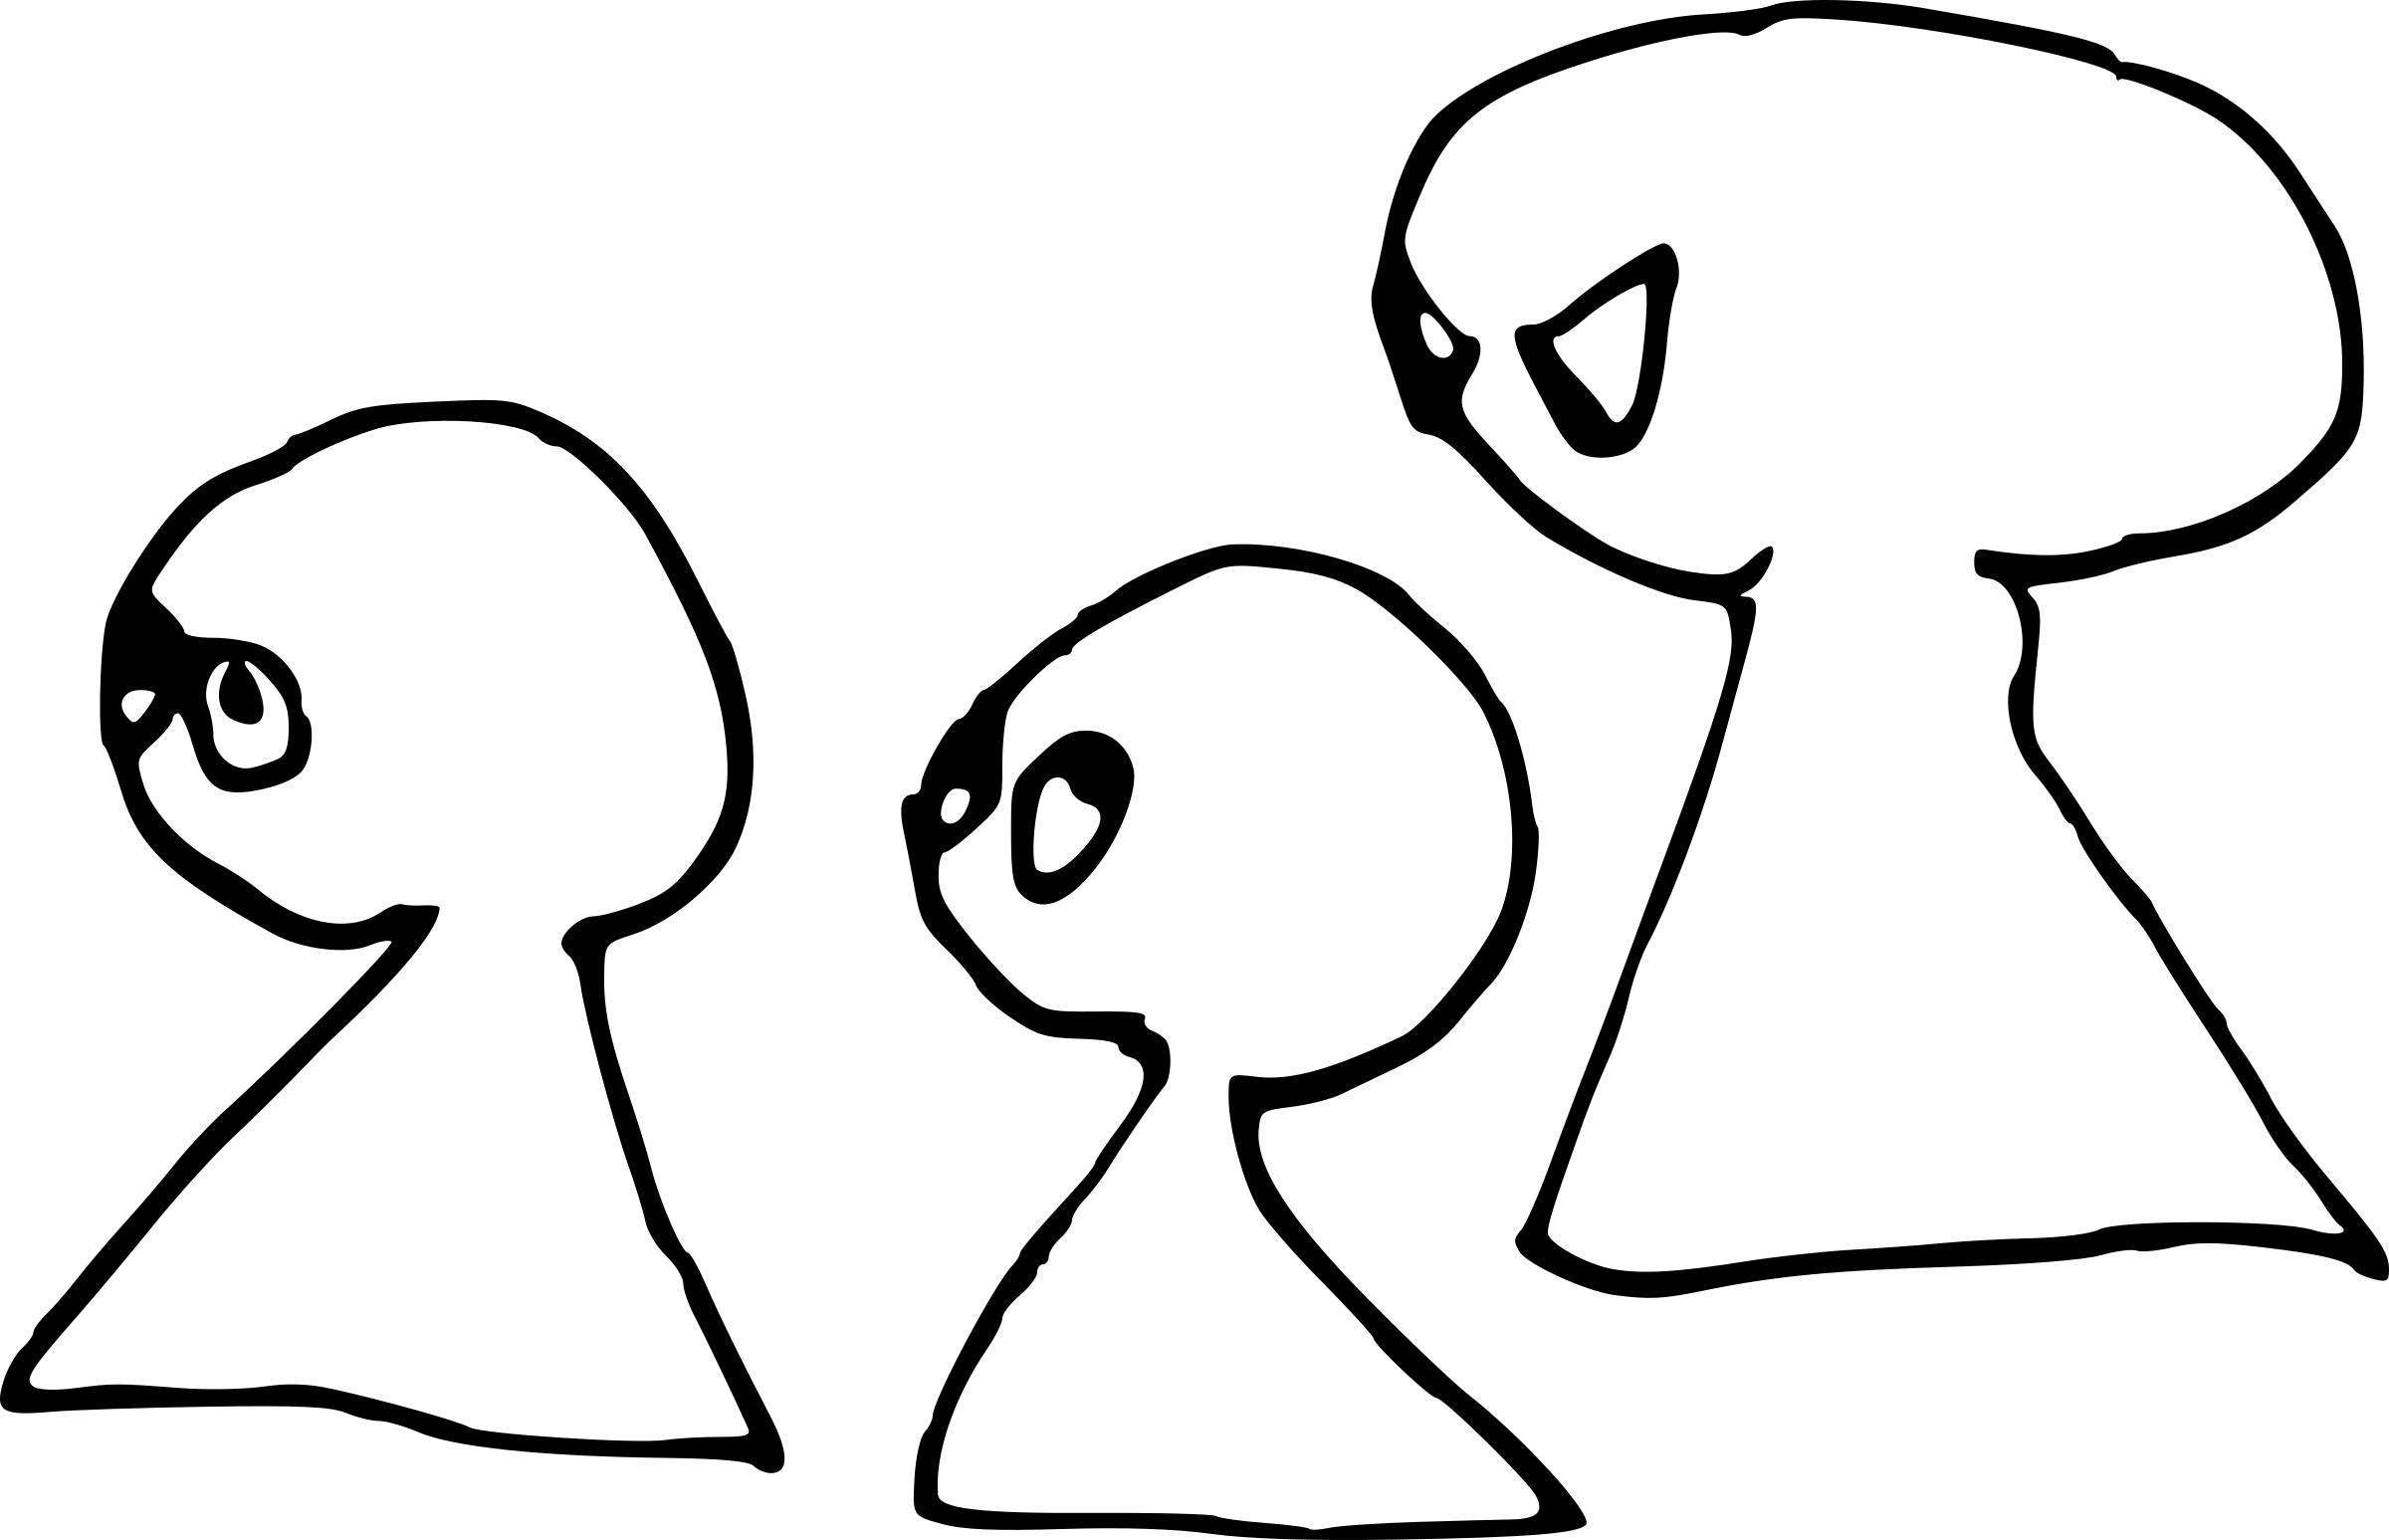 Three ghosts png